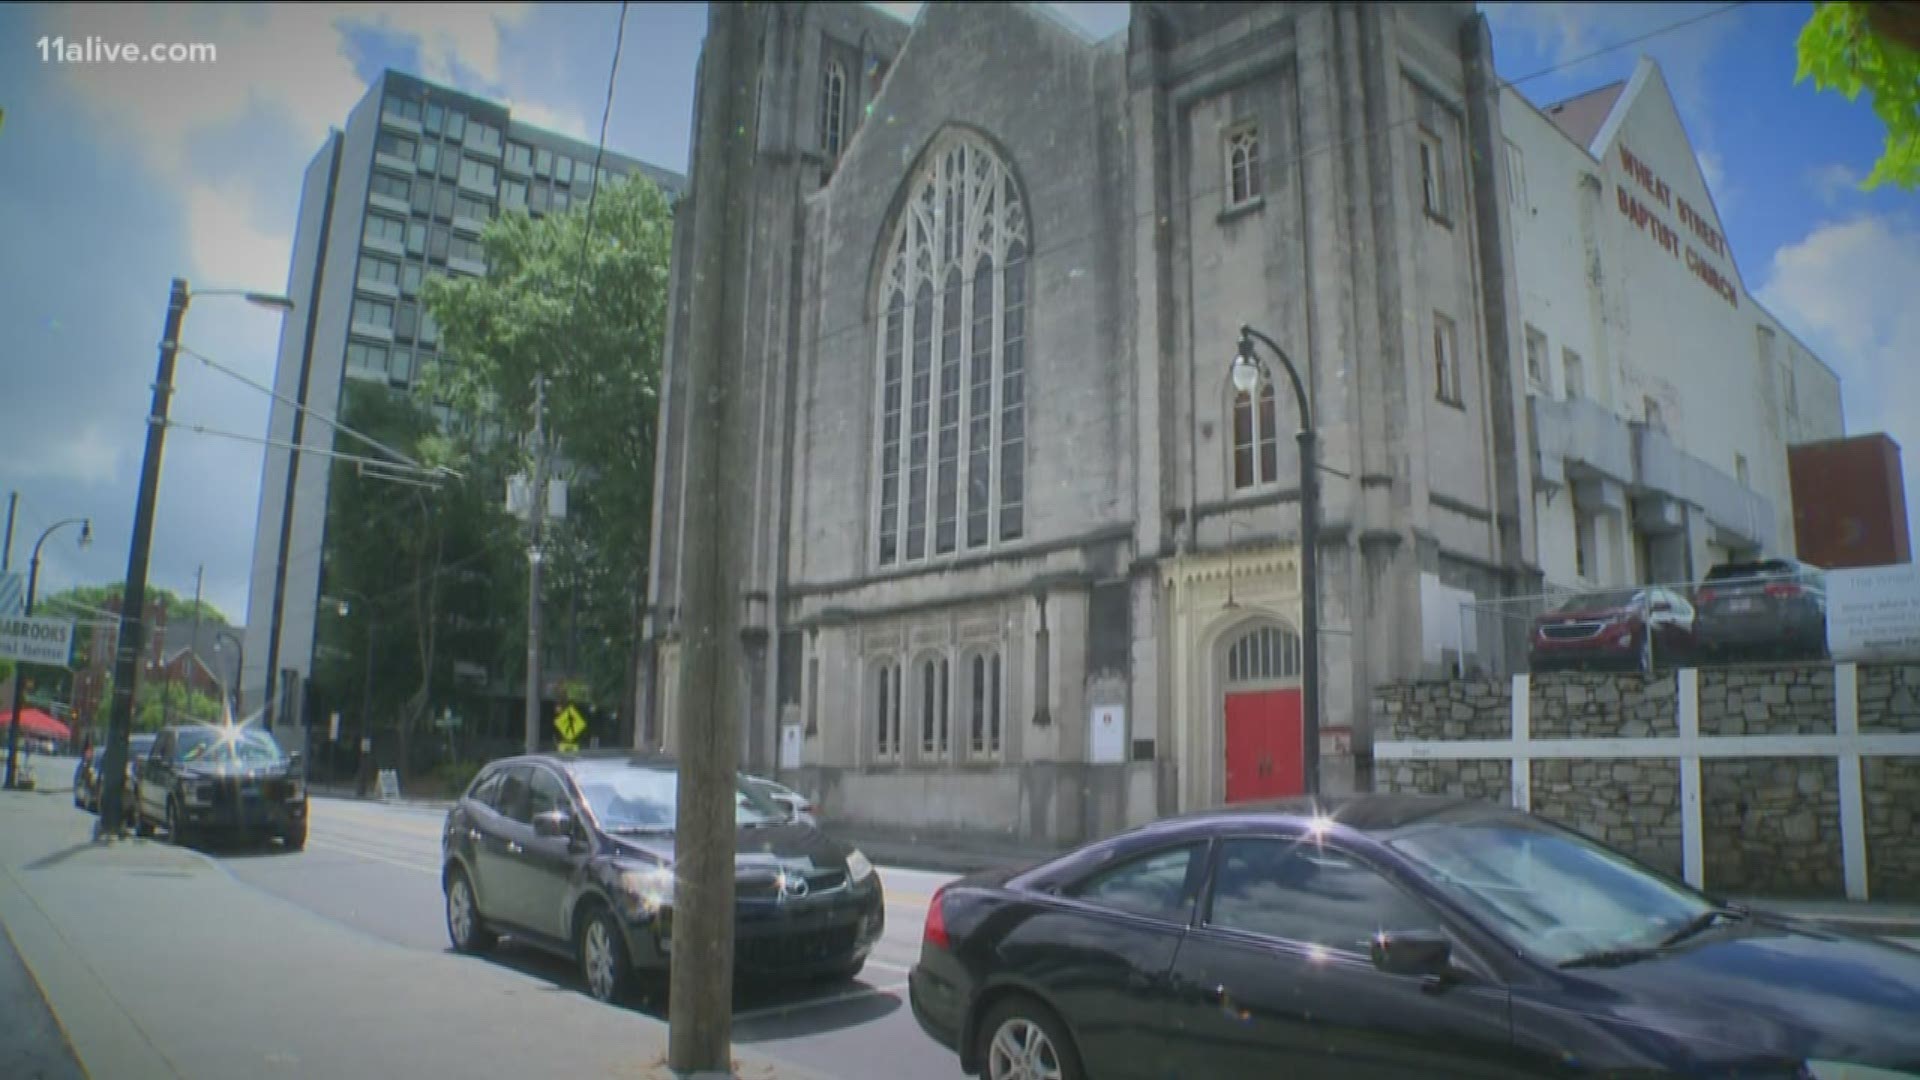 11Alive's Nick Sturidvant attended Sunday's service to see how restoration work is going at the historic church.